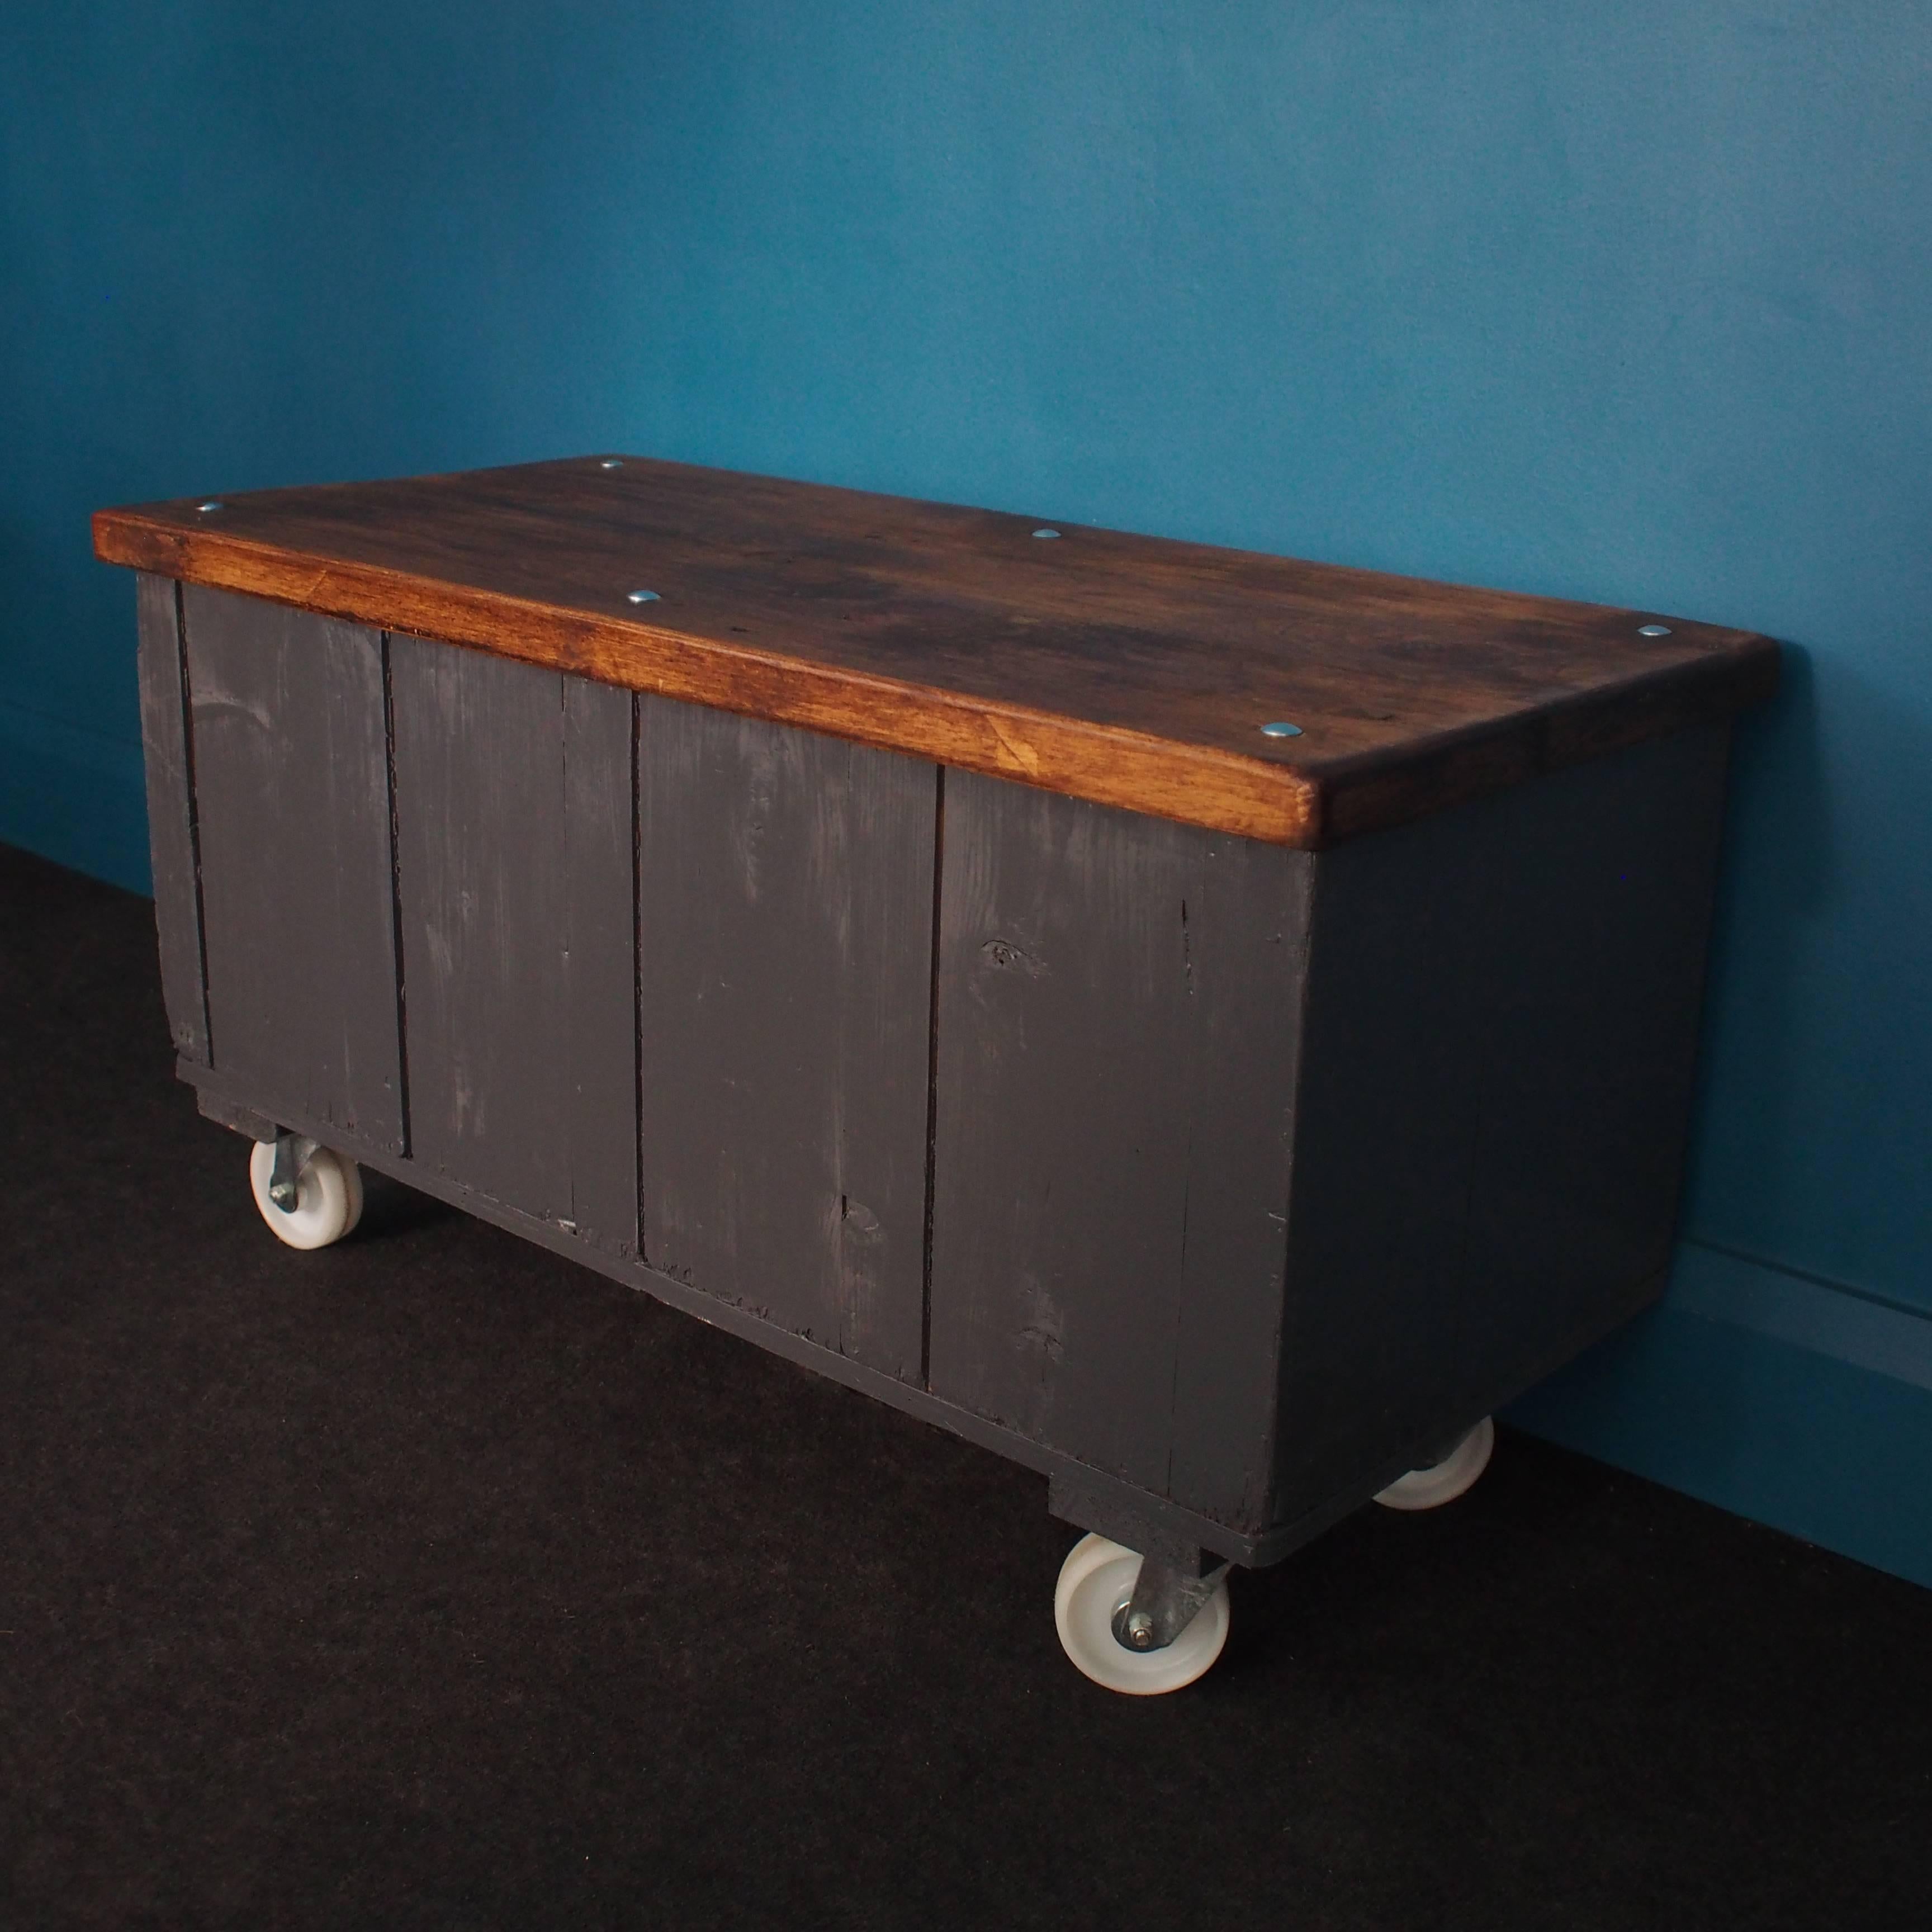 Softwood Vintage Rustic Industrial Storage Cabinet on Casters with Reclaimed Wooden Top For Sale